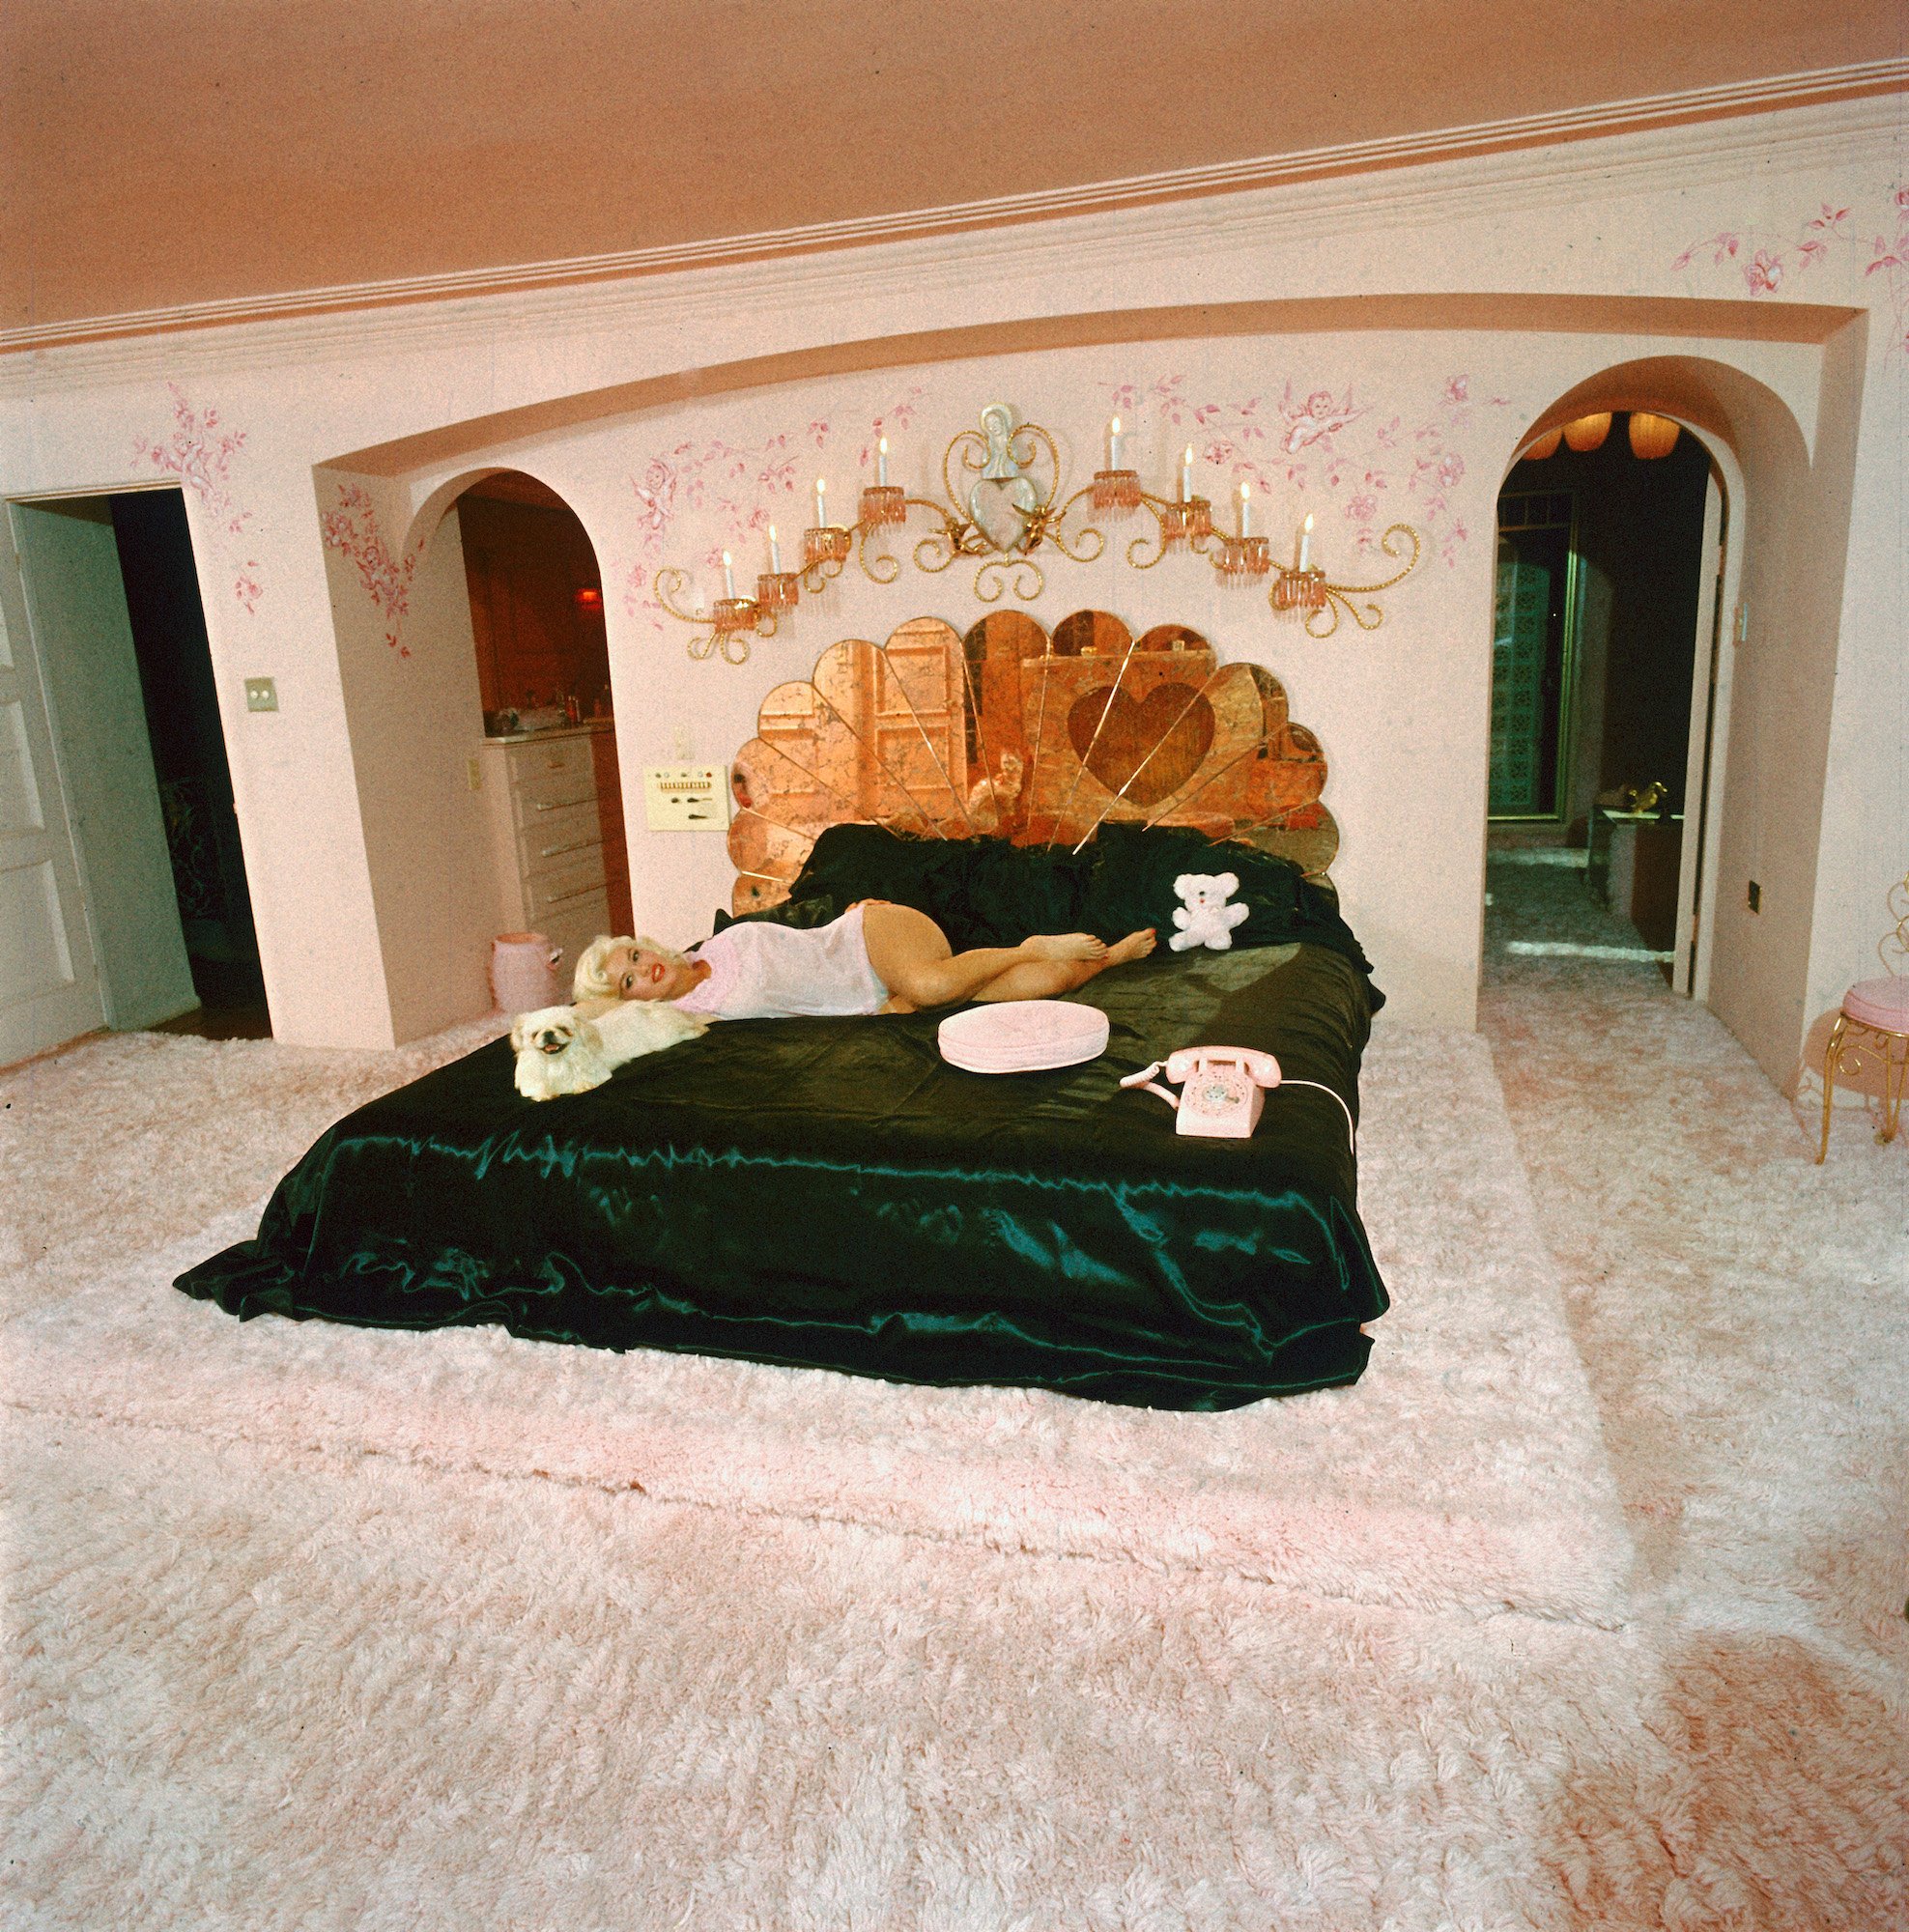 Jayne Mansfield lying on her bed in a light pink room